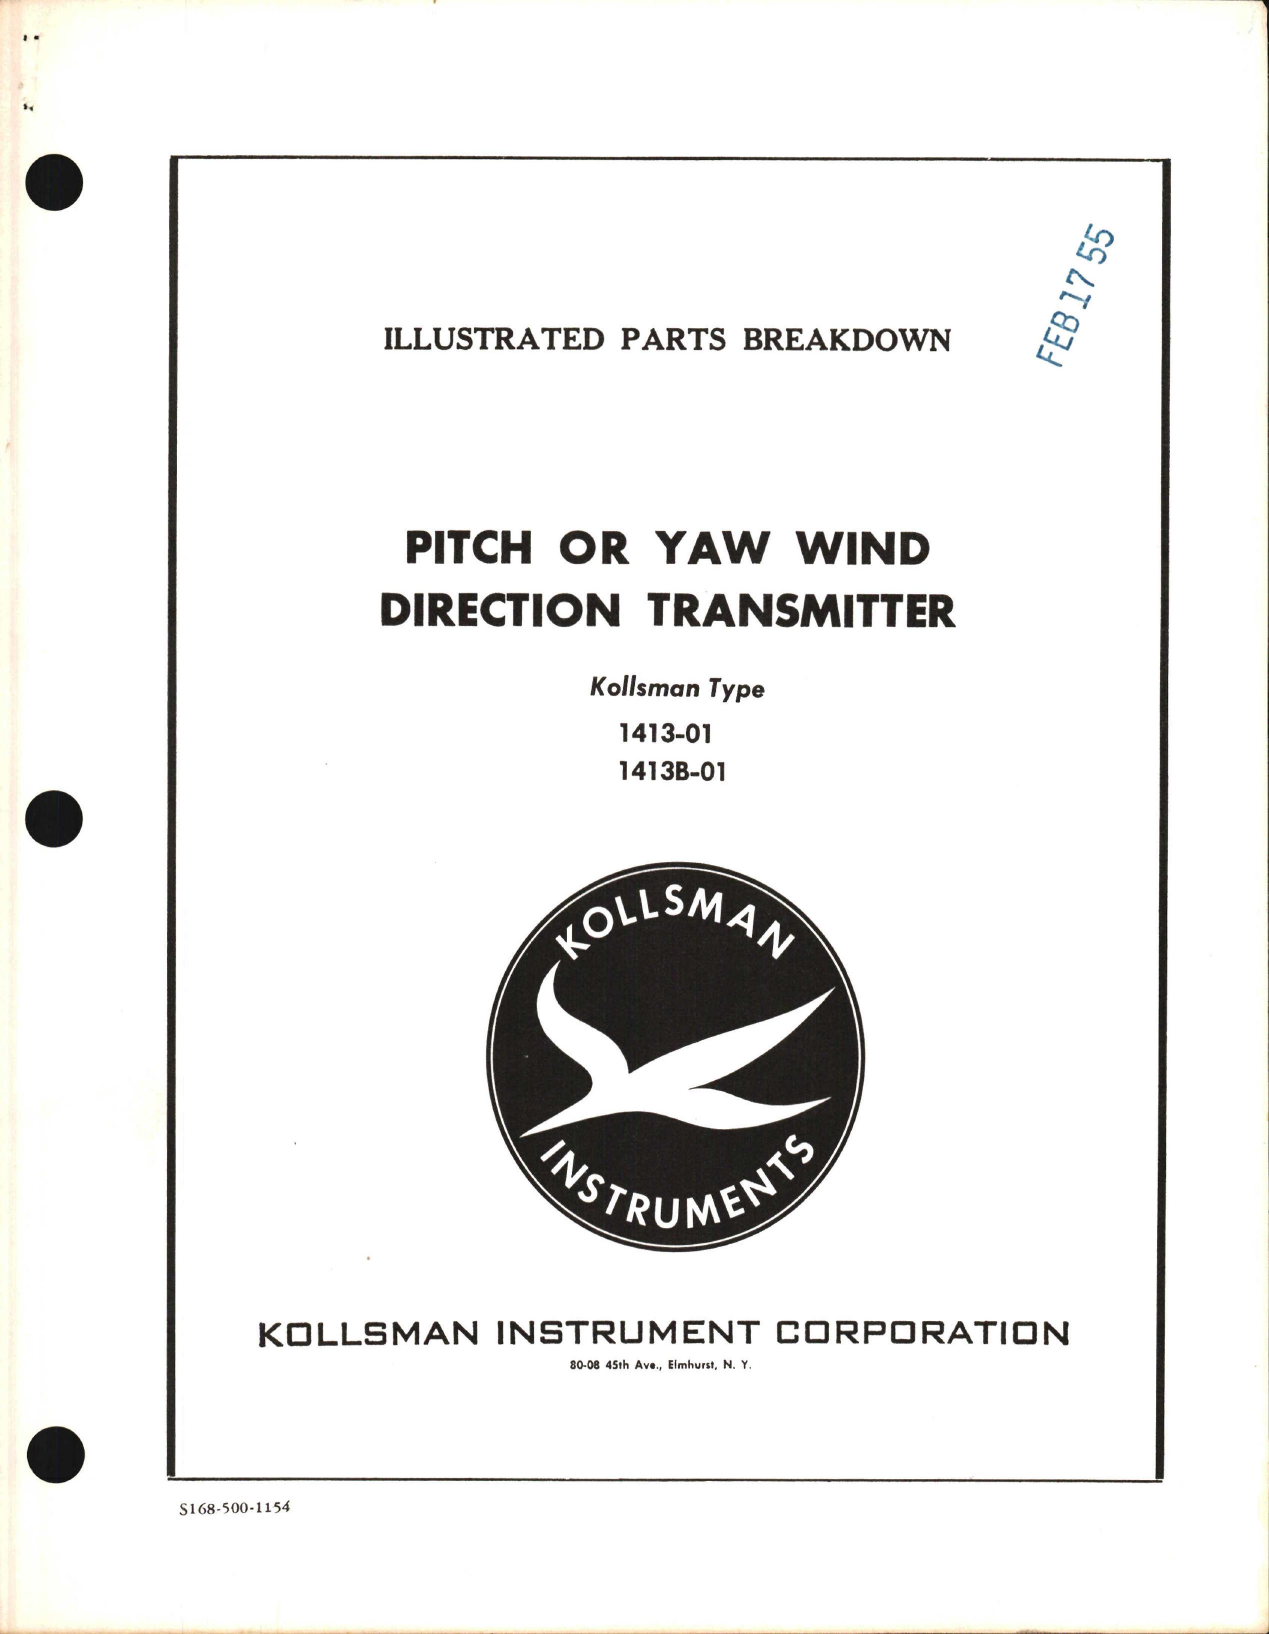 Sample page 1 from AirCorps Library document: Illustrated Parts Breakdown for Kollsman Pitch or Yaw Wind Direction Transmitter